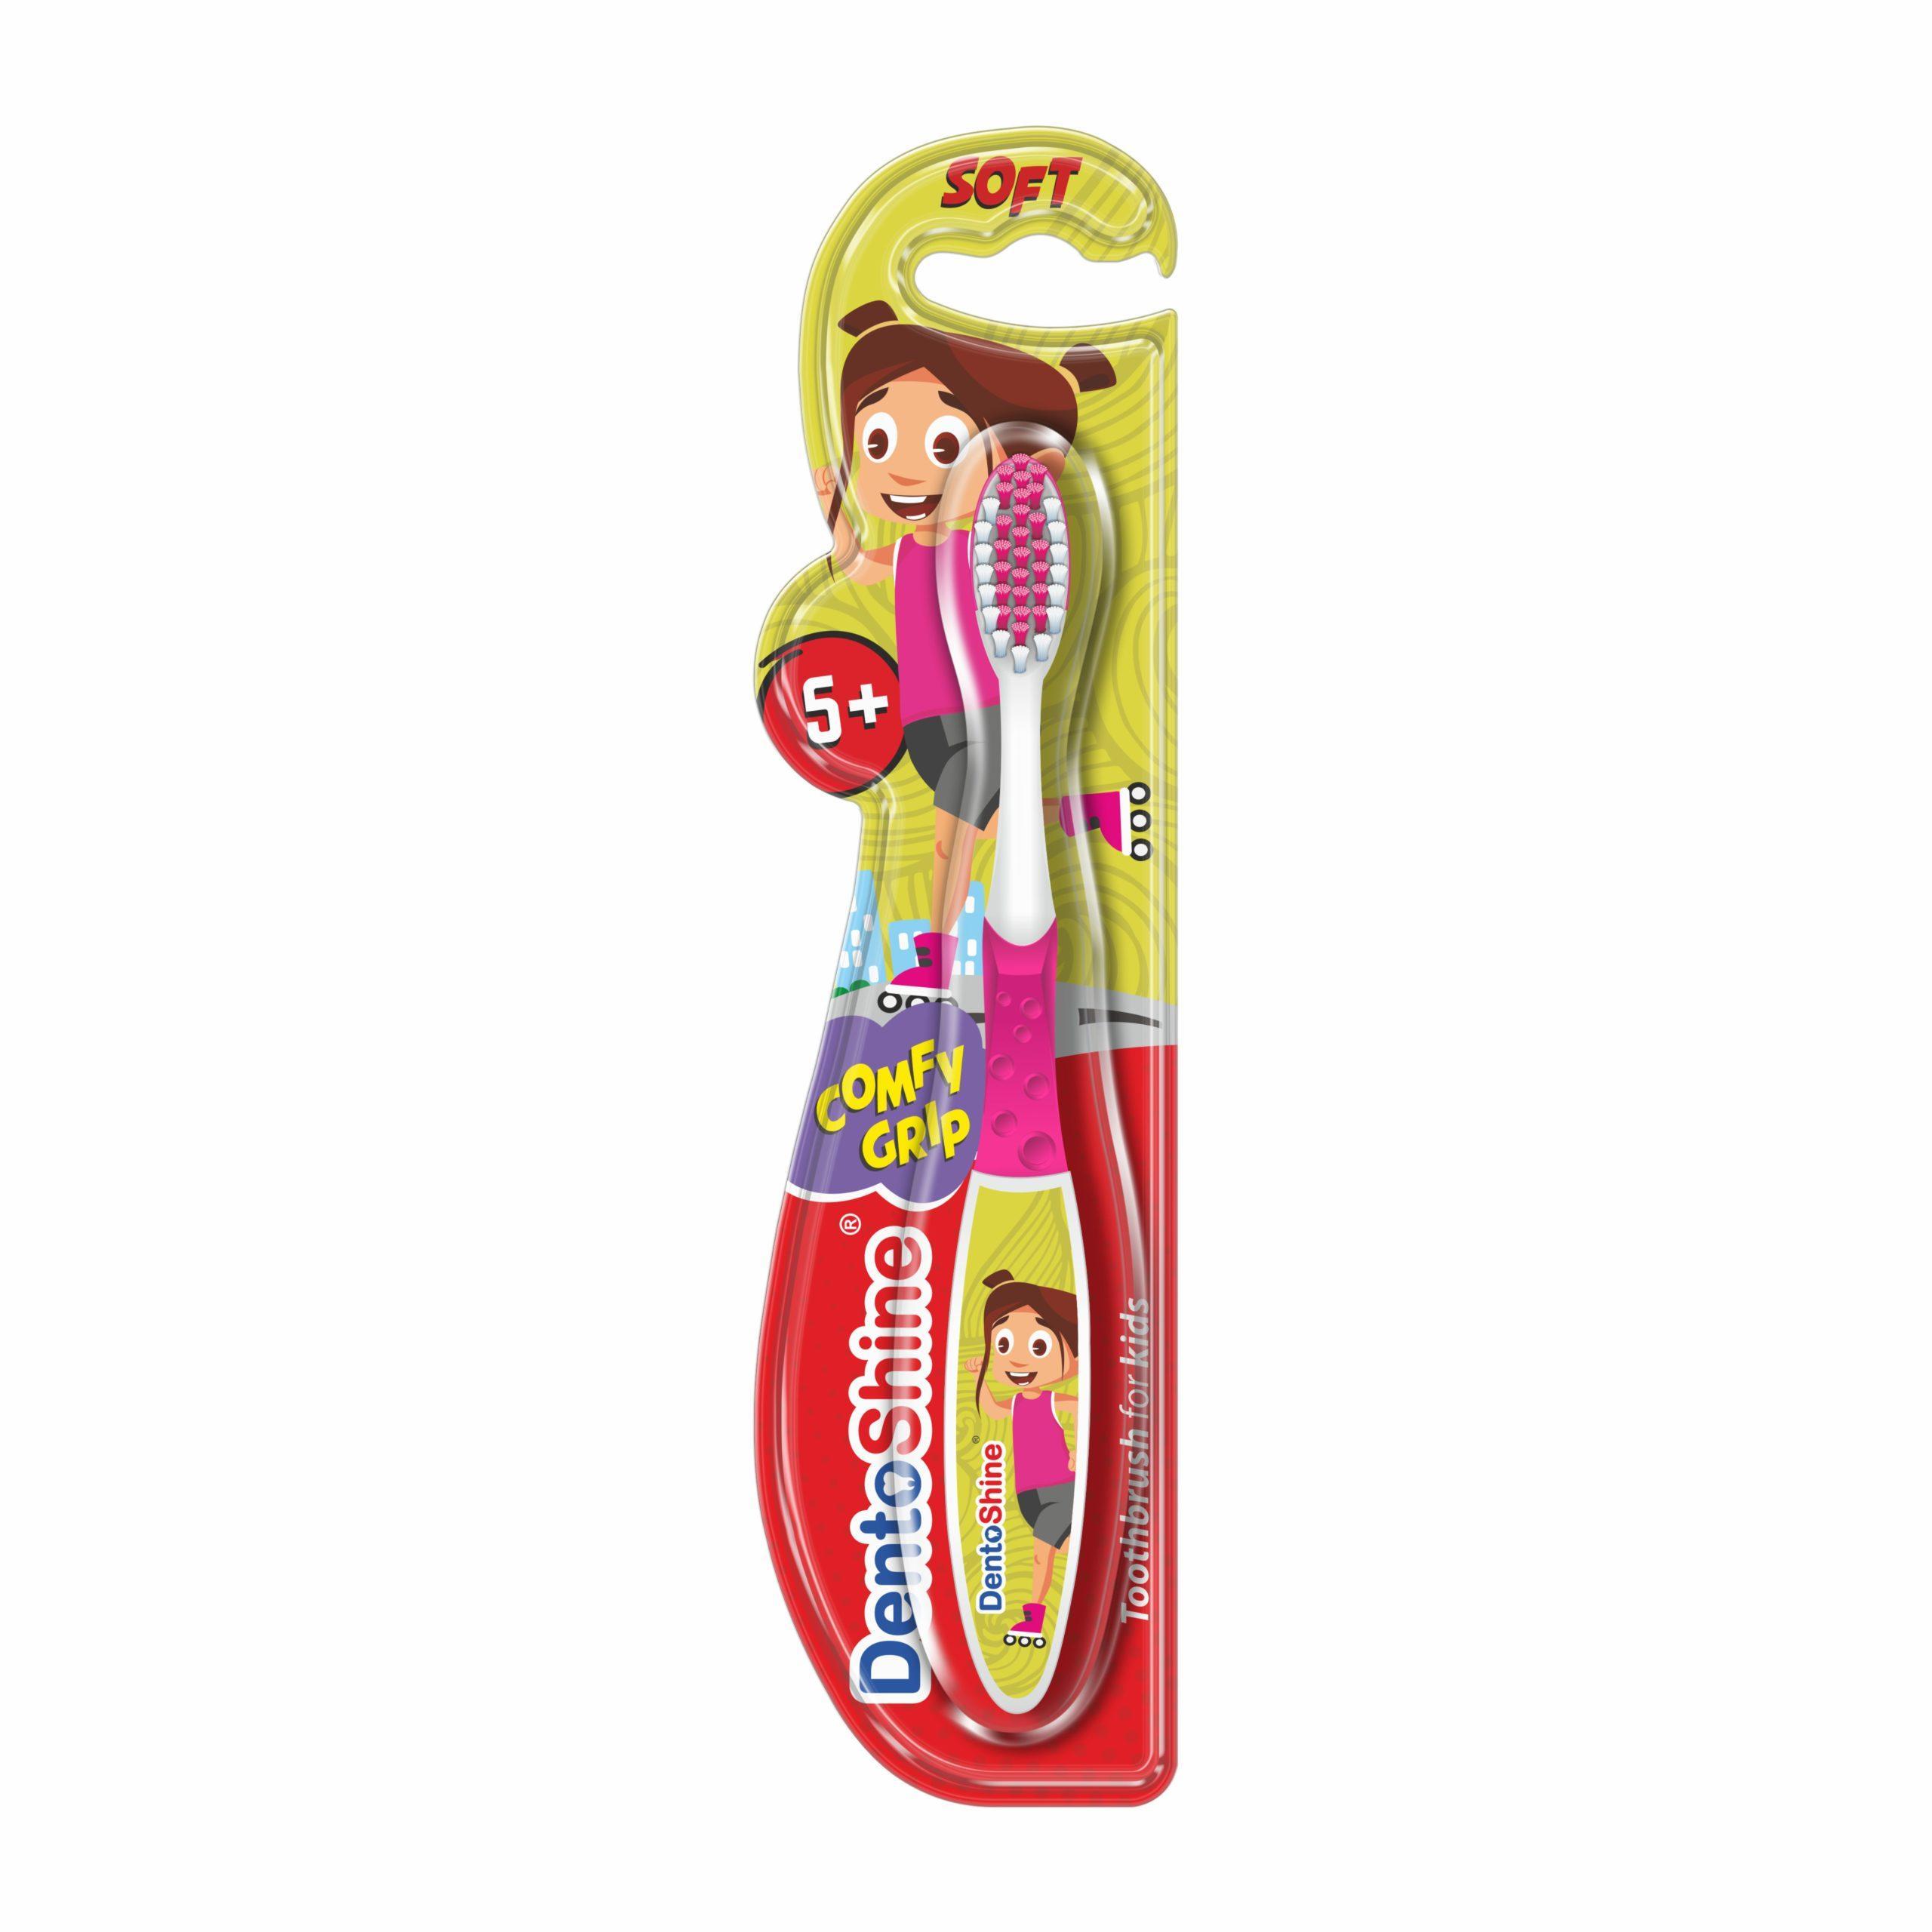 COMFY Grip Toothbrush for Kids (Ages 5+) – Pink